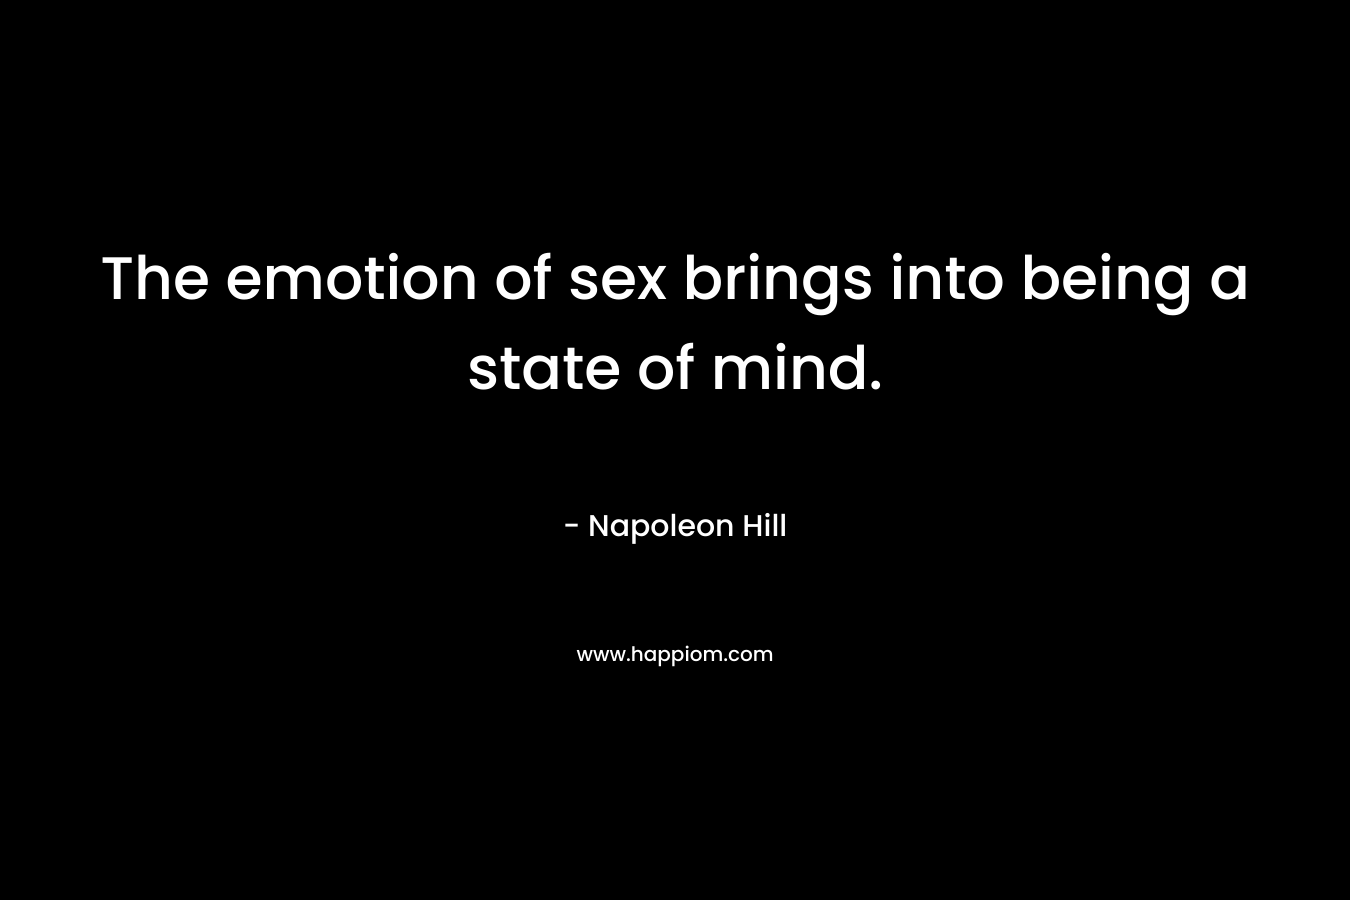 The emotion of sex brings into being a state of mind.